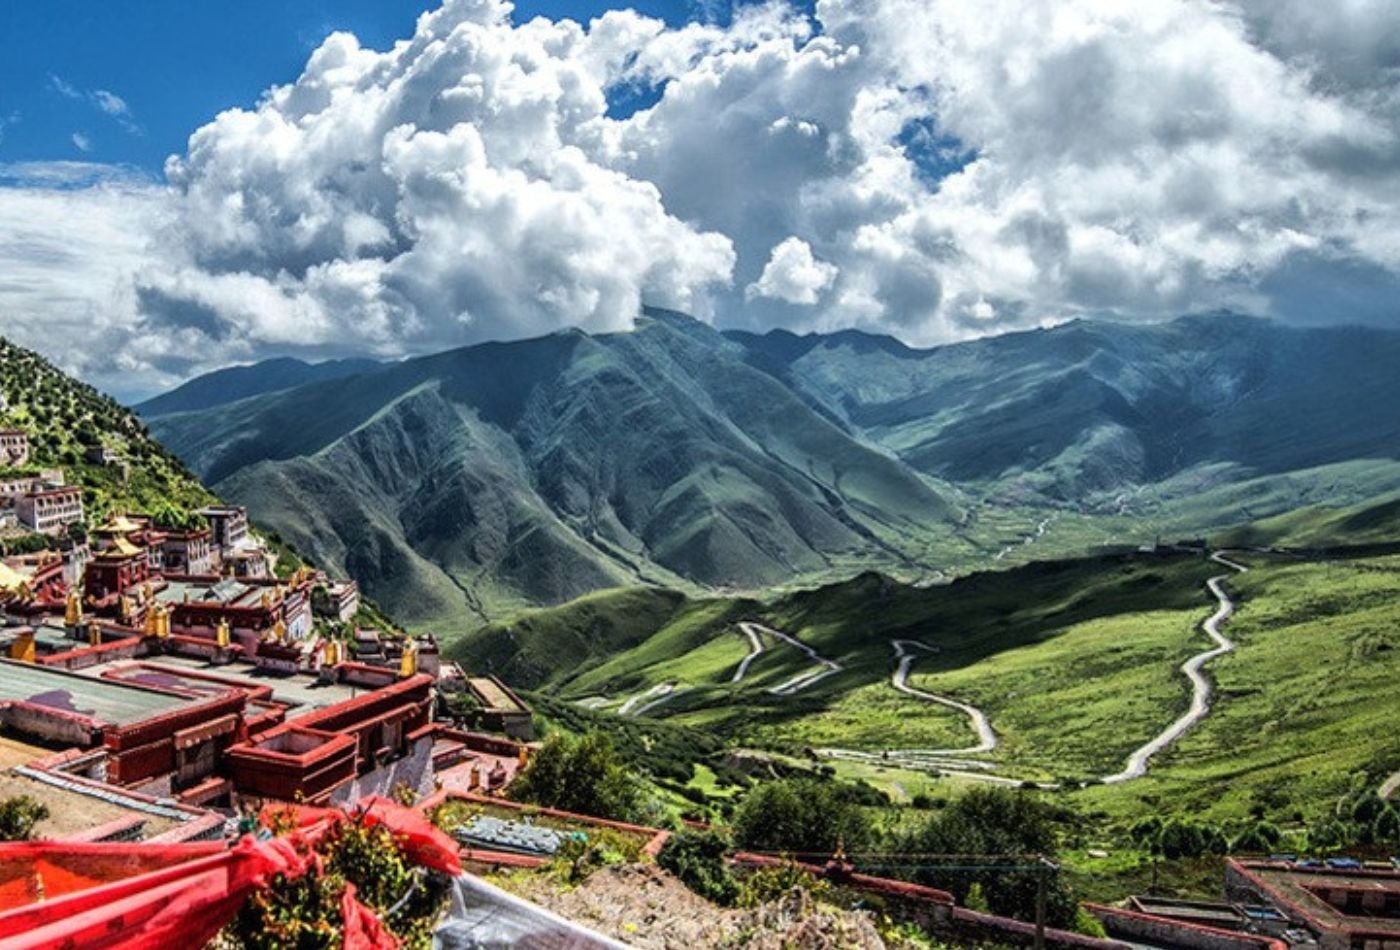 A winding road leads to Ganden Monastery, nestled in a valley with clouds in the sky above. The surrounding landscape is lush and green, adding to the beauty of the scene.